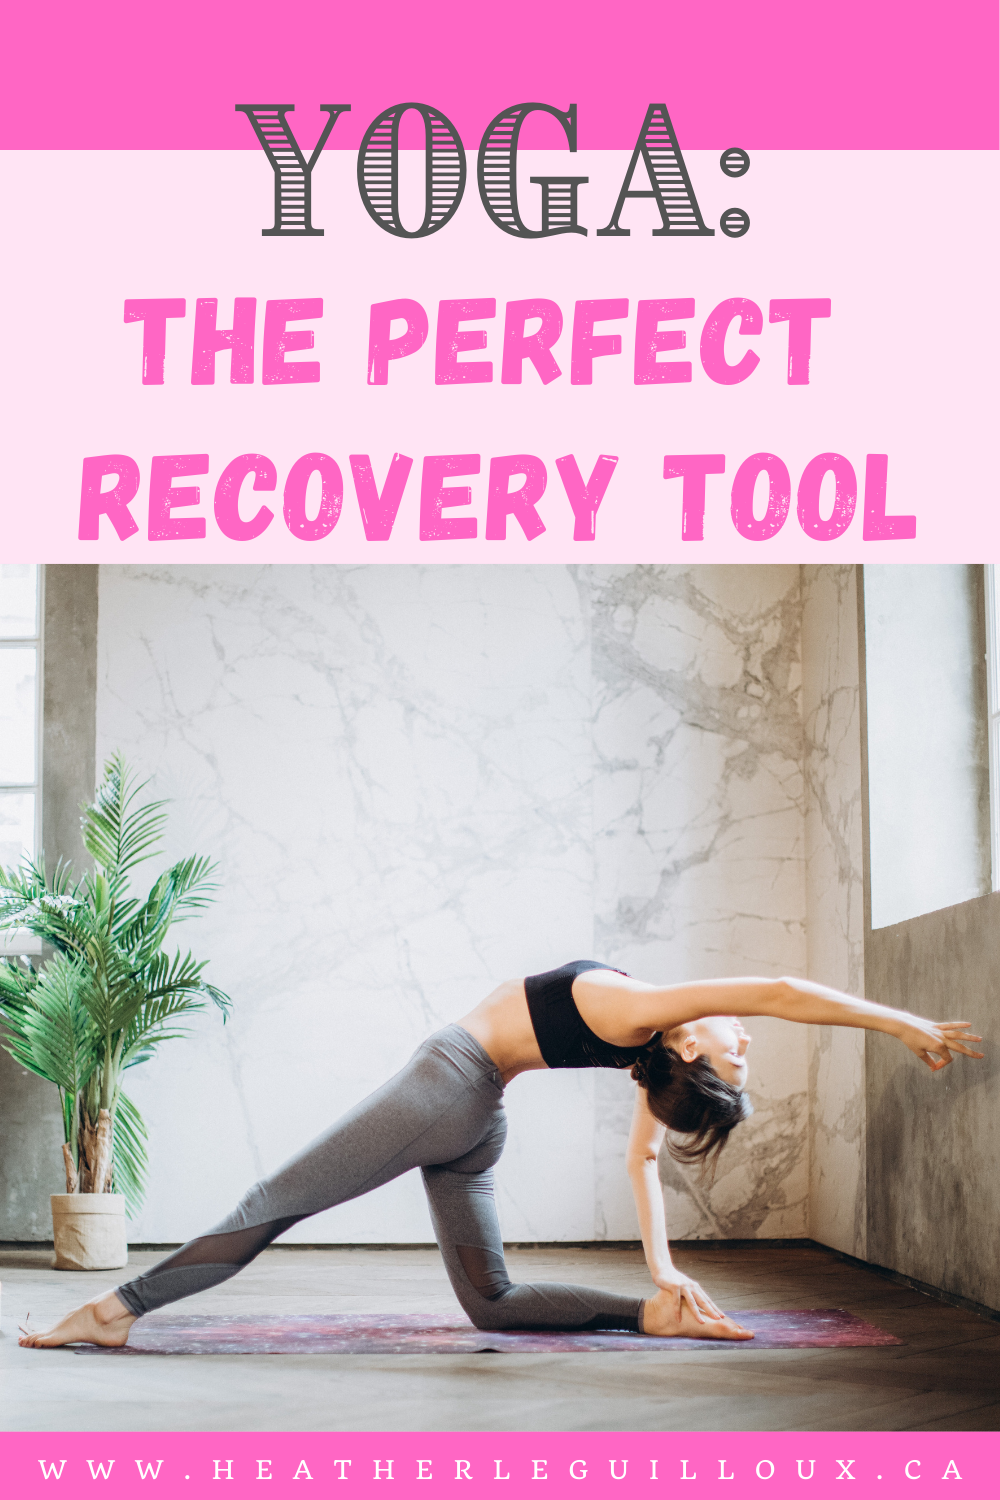 Yoga: The Perfect Recovery Tool - Heather LeGuilloux / mental health blogger